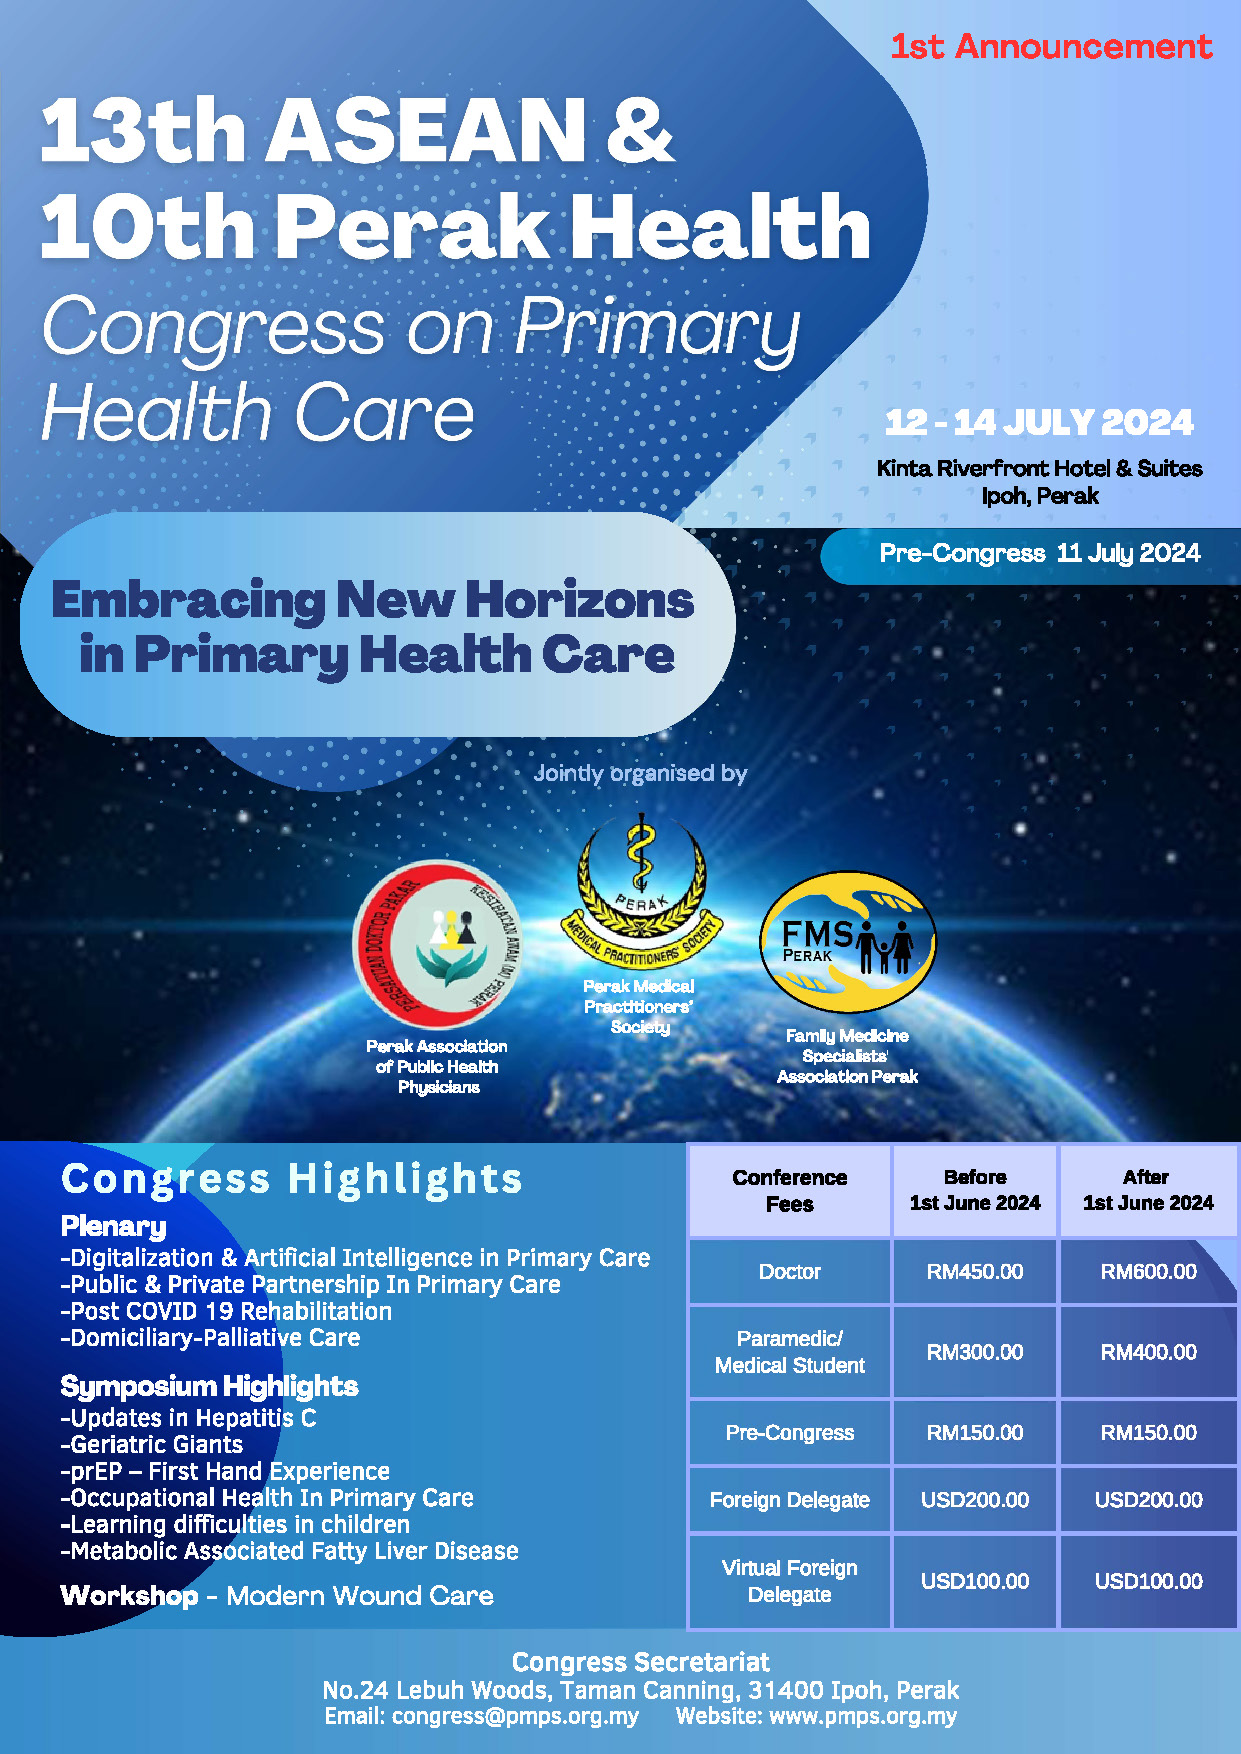 13th ASEAN & 10th Perak Health Congress on Primary Health Care, 12-14 Jul 2024, Ipoh, Malaysia: First Announcement